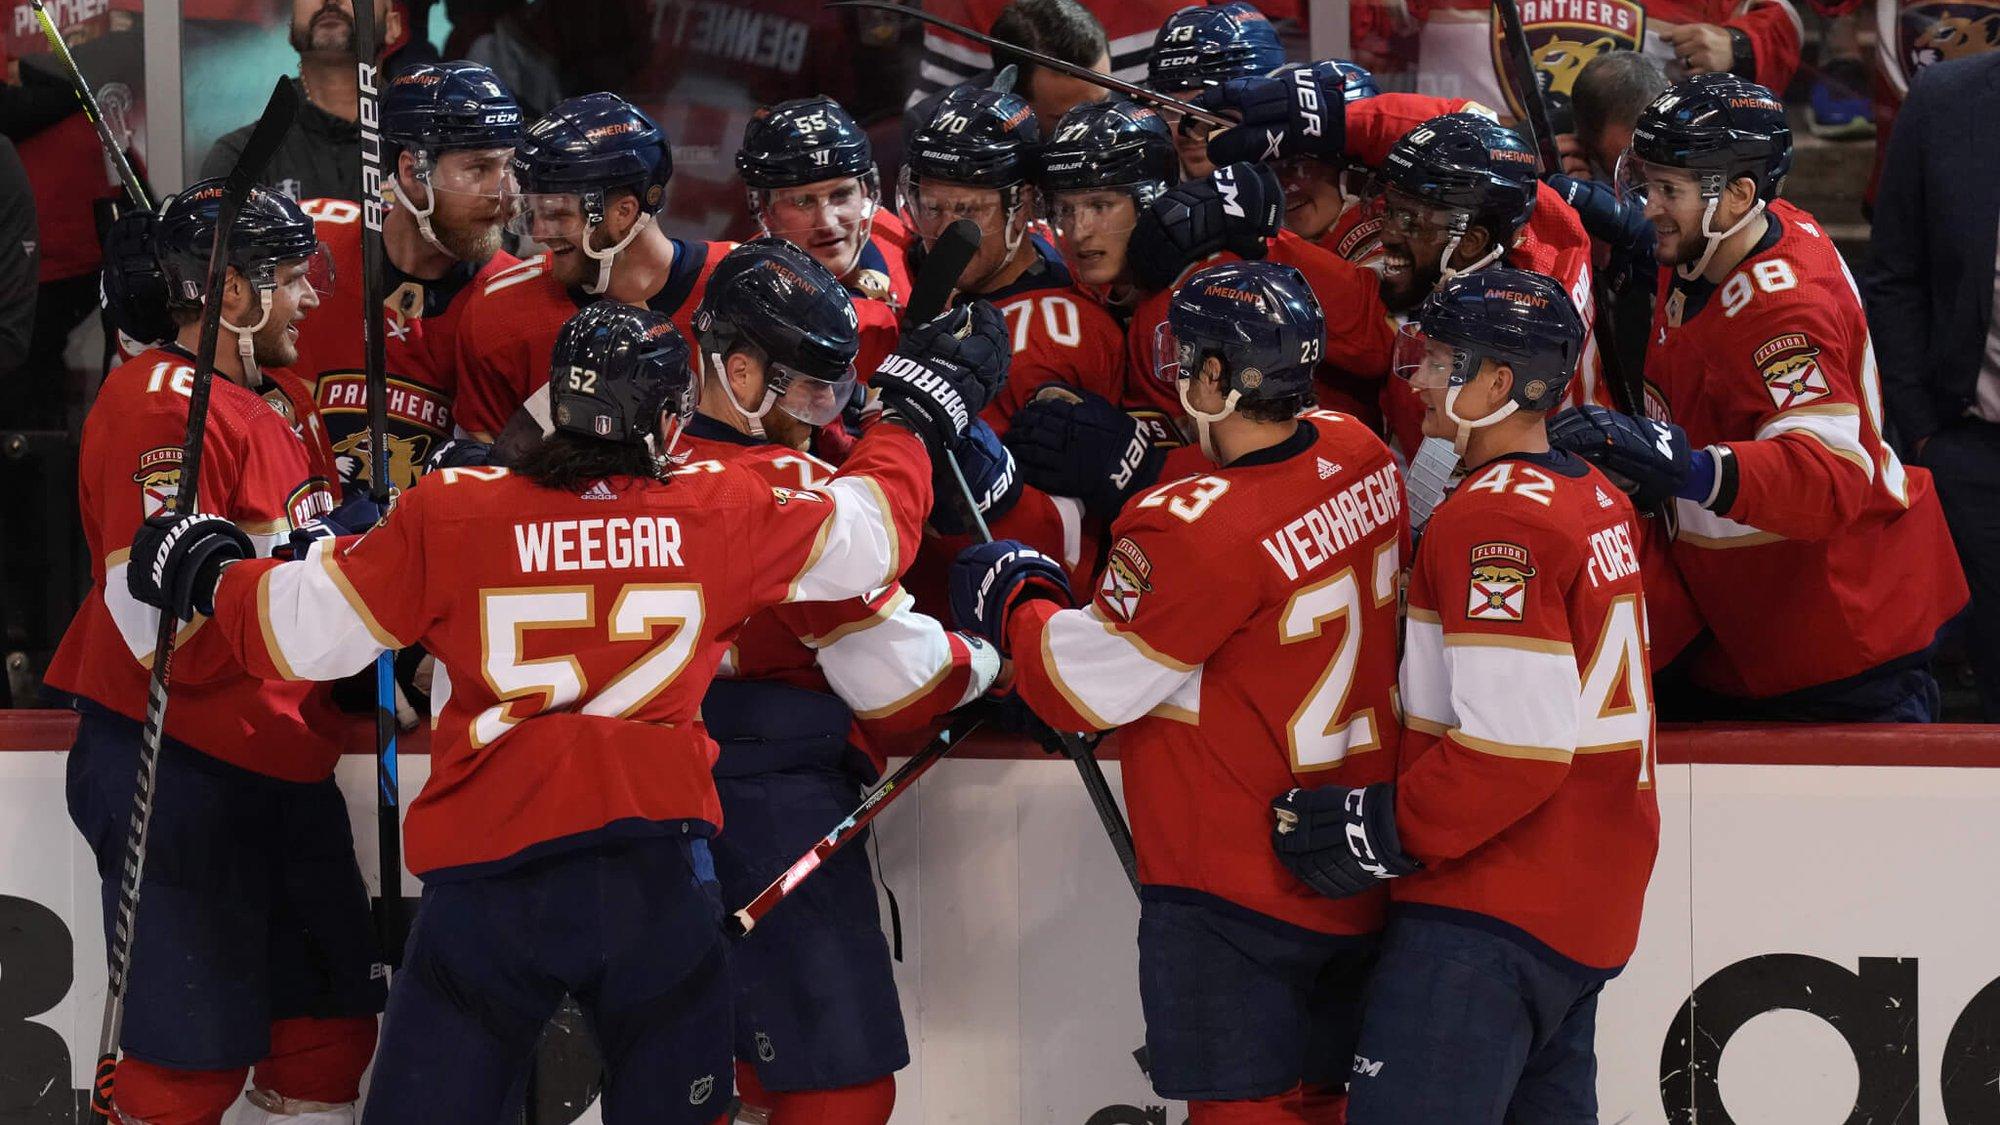 Panthers vs. Capitals Game 6 Odds and Predictions: Cats the Bet to Close Out Series